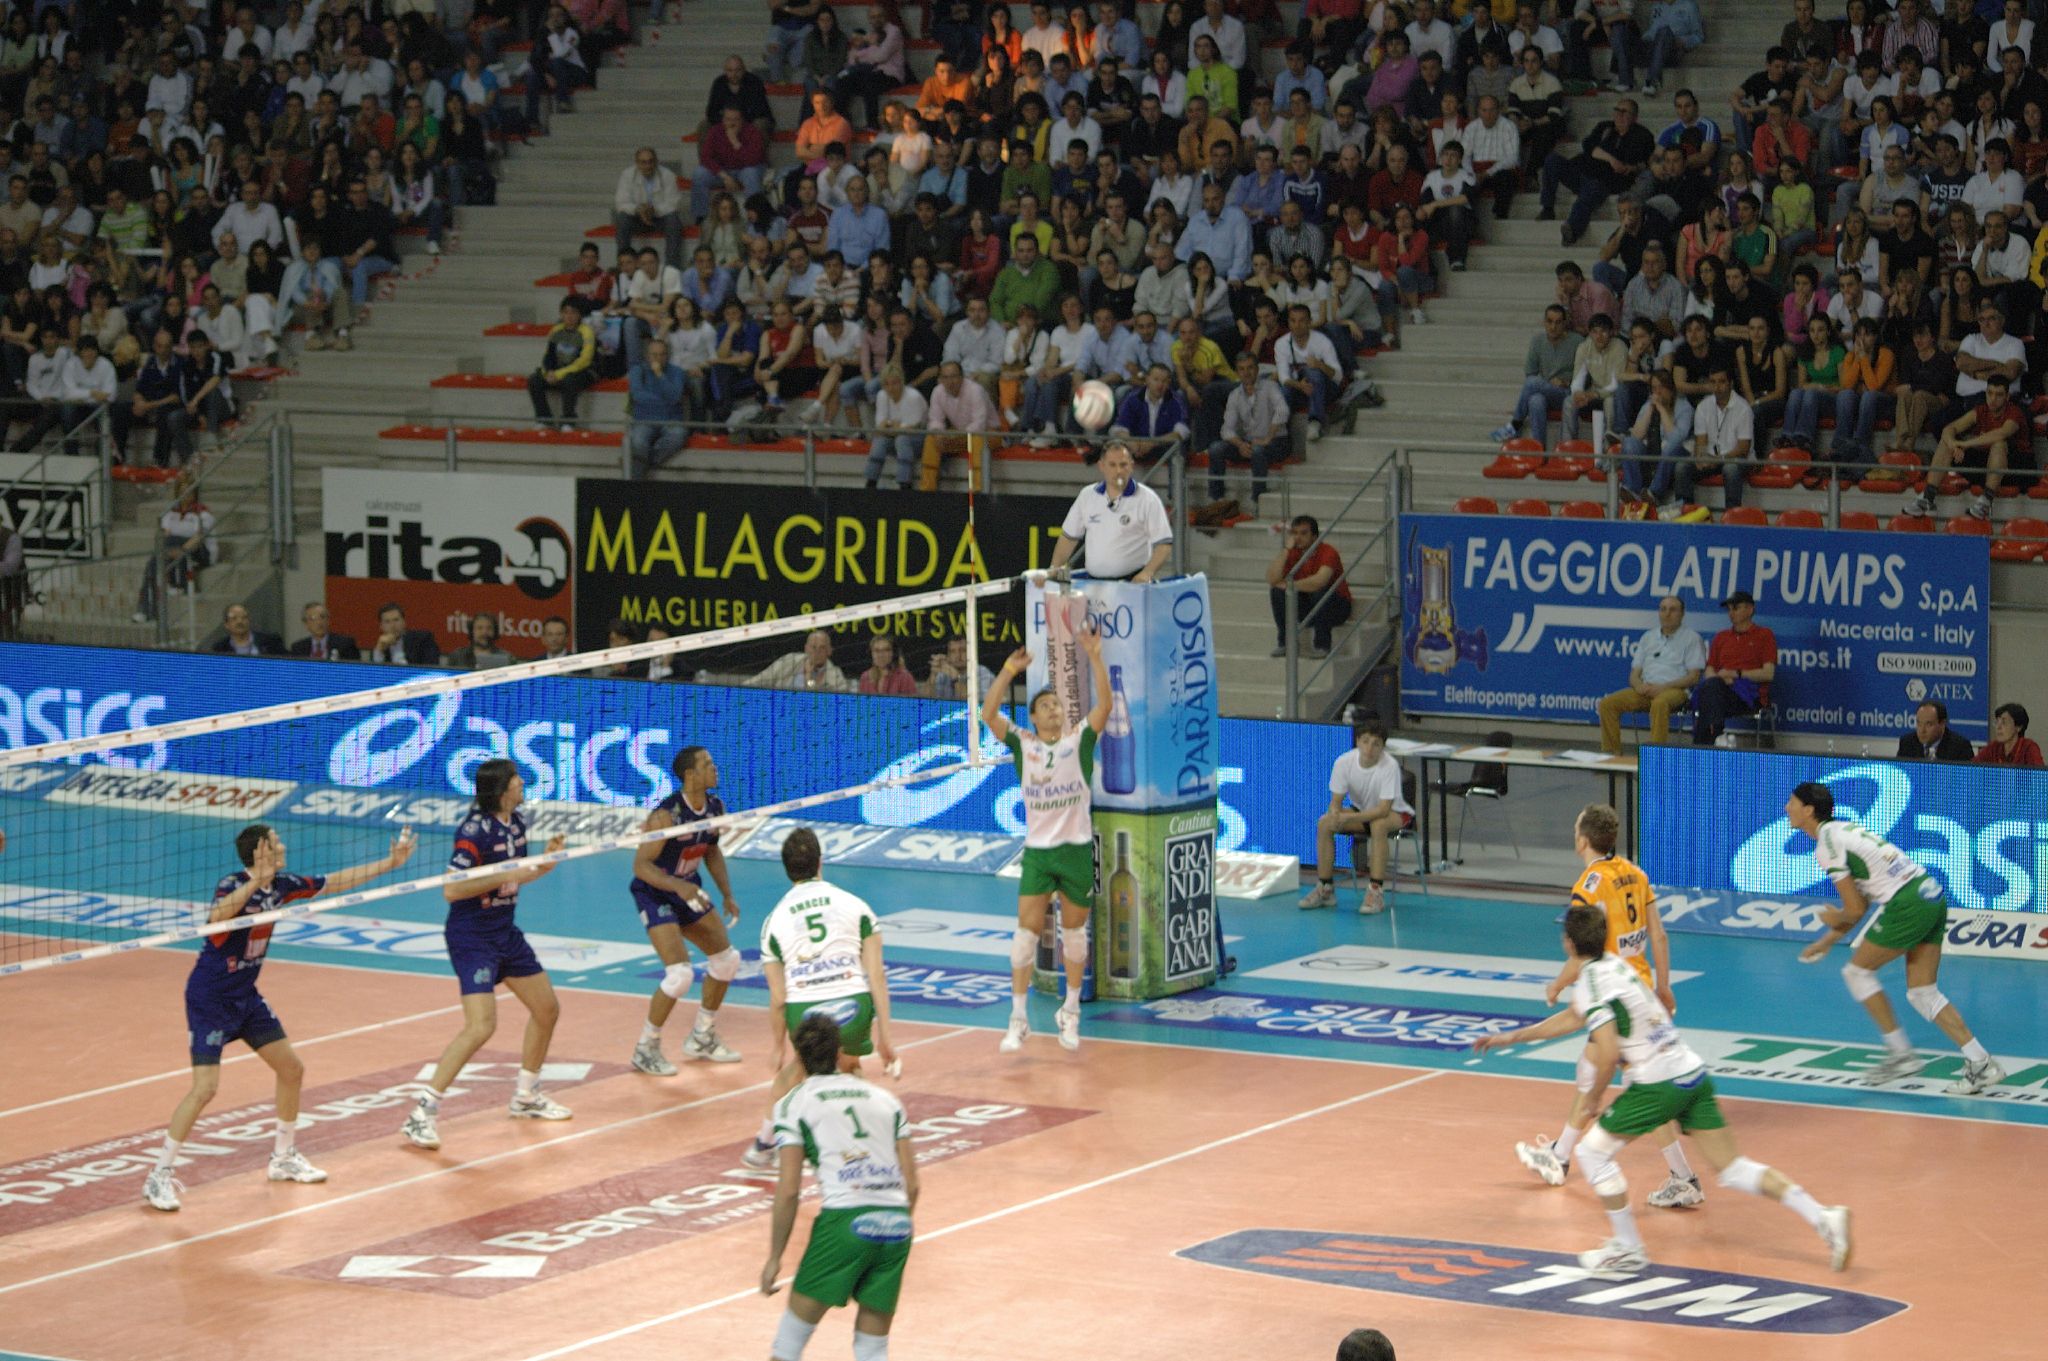 group of men playing a game of volleyball